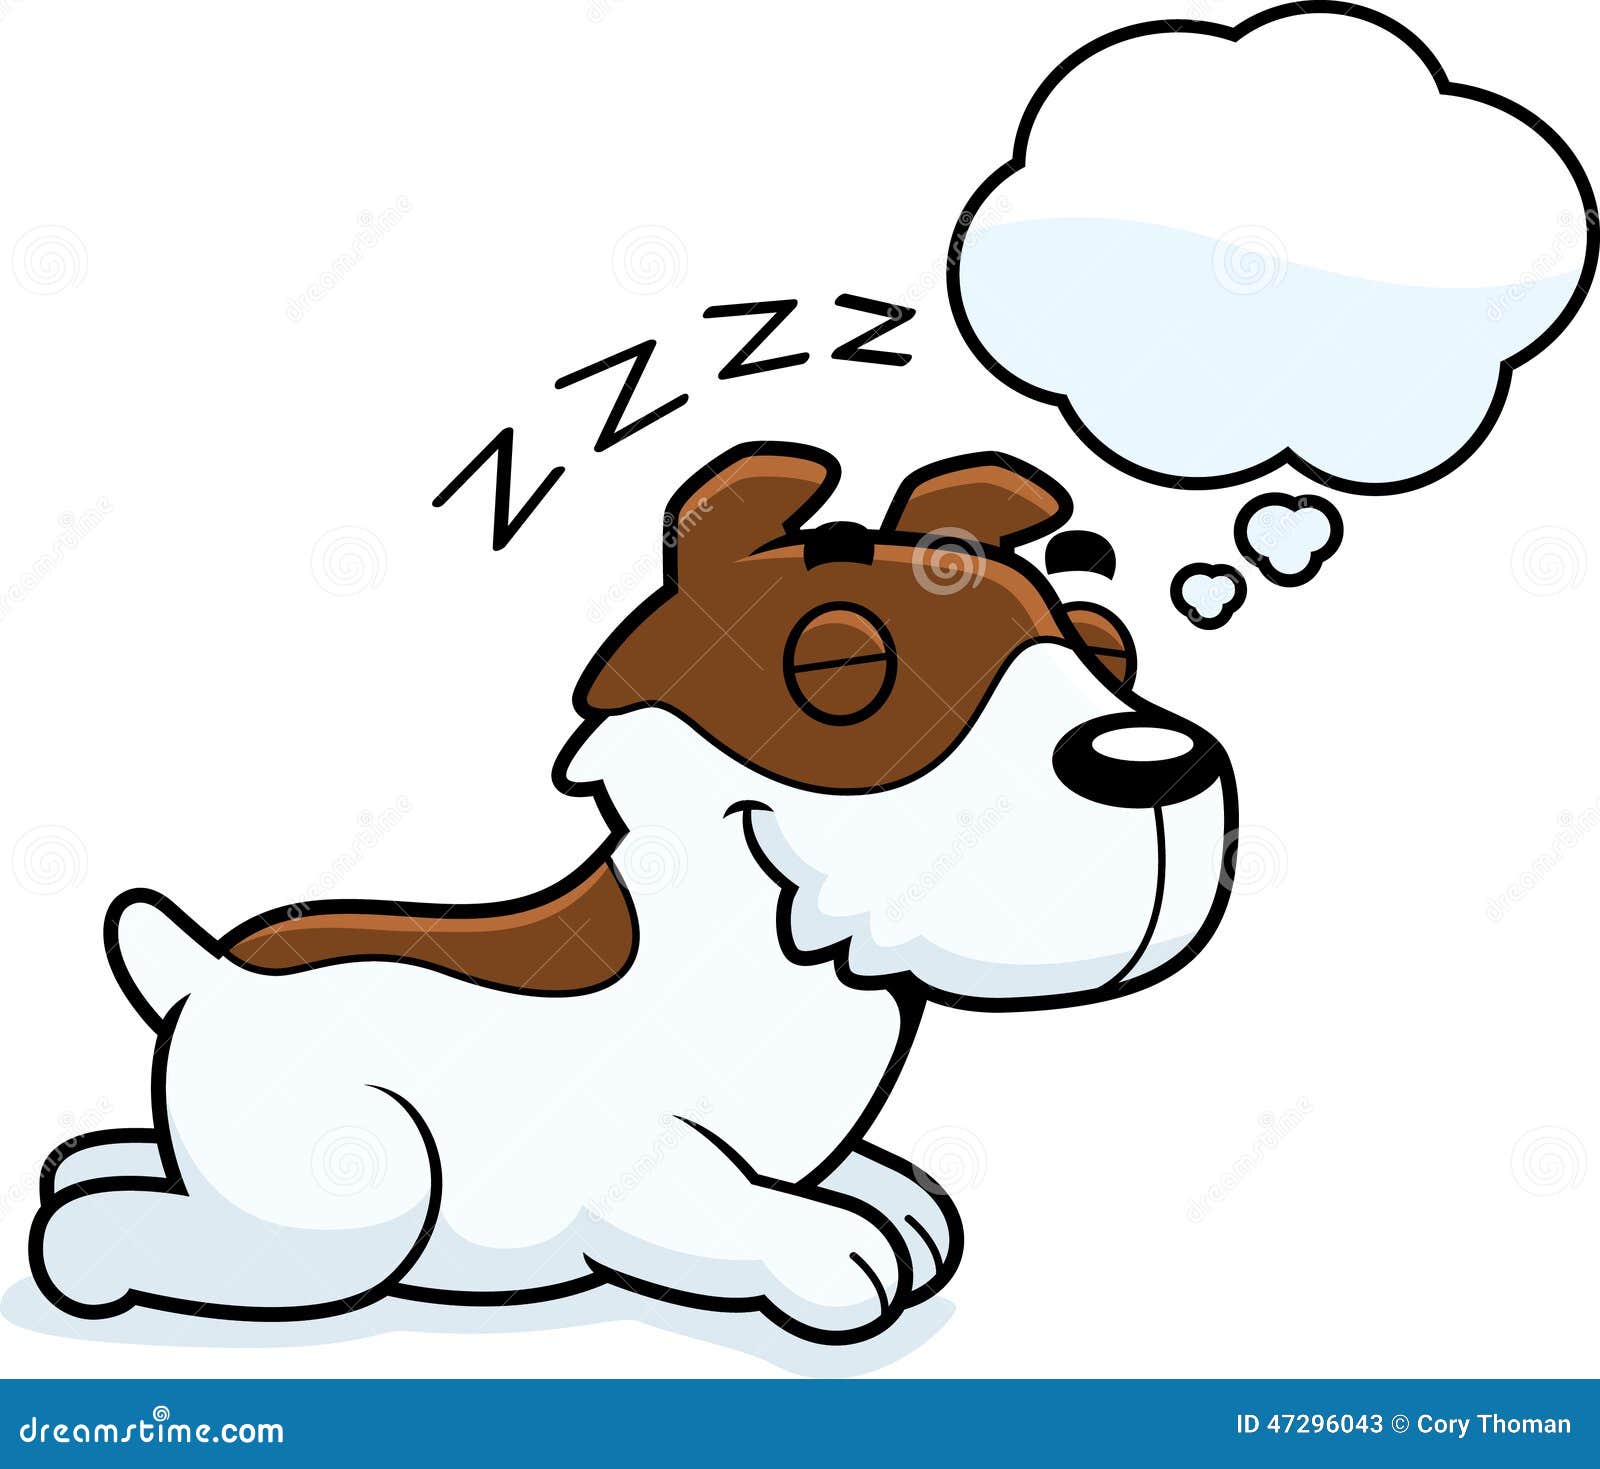 clip art jack russell dog - photo #42